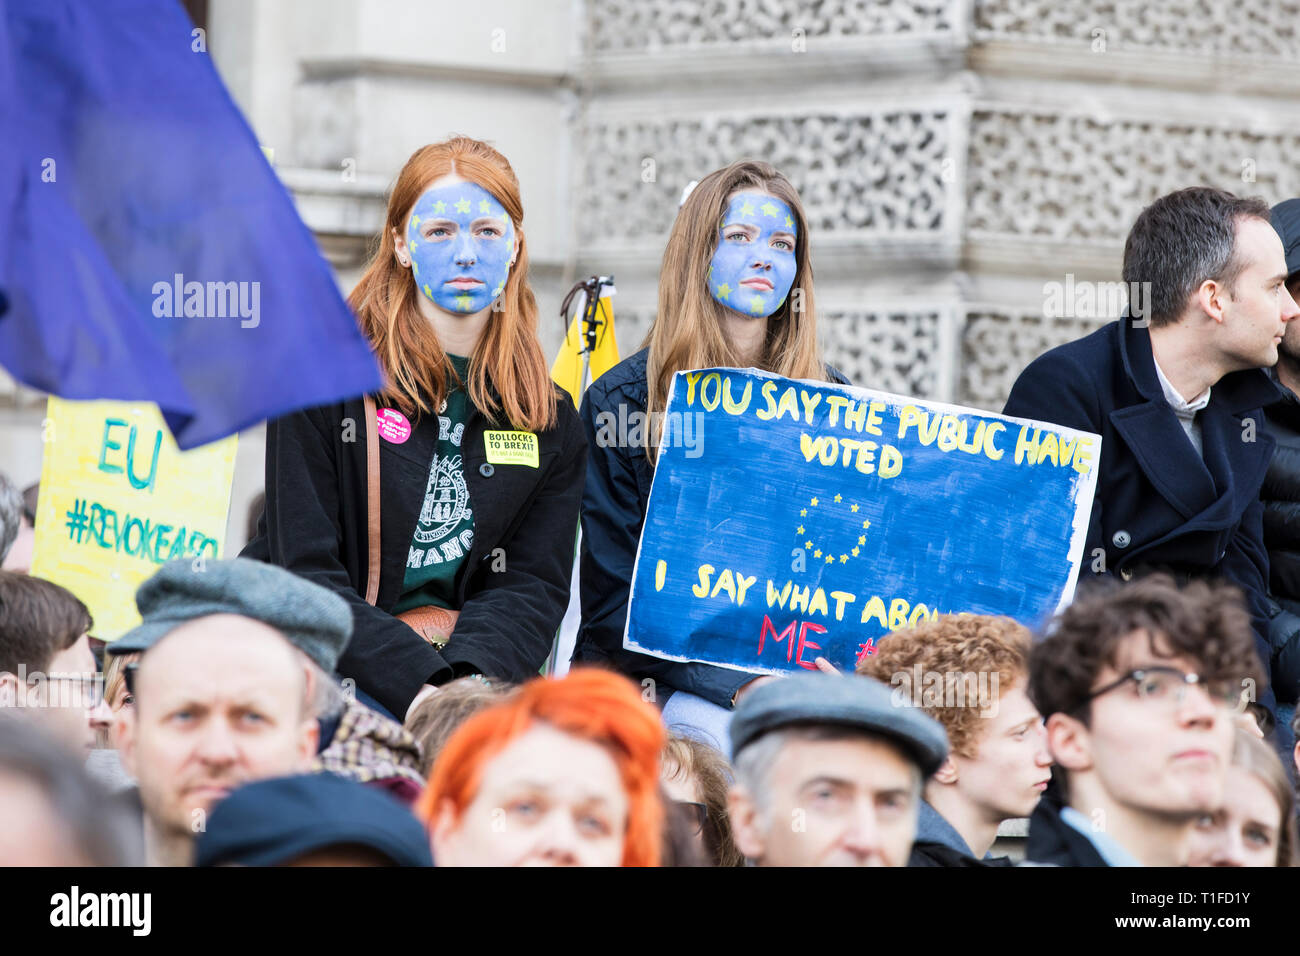 LONDON, UK - March 23rd 2019: People with European Union flag face paint at an anti Brexit march Stock Photo